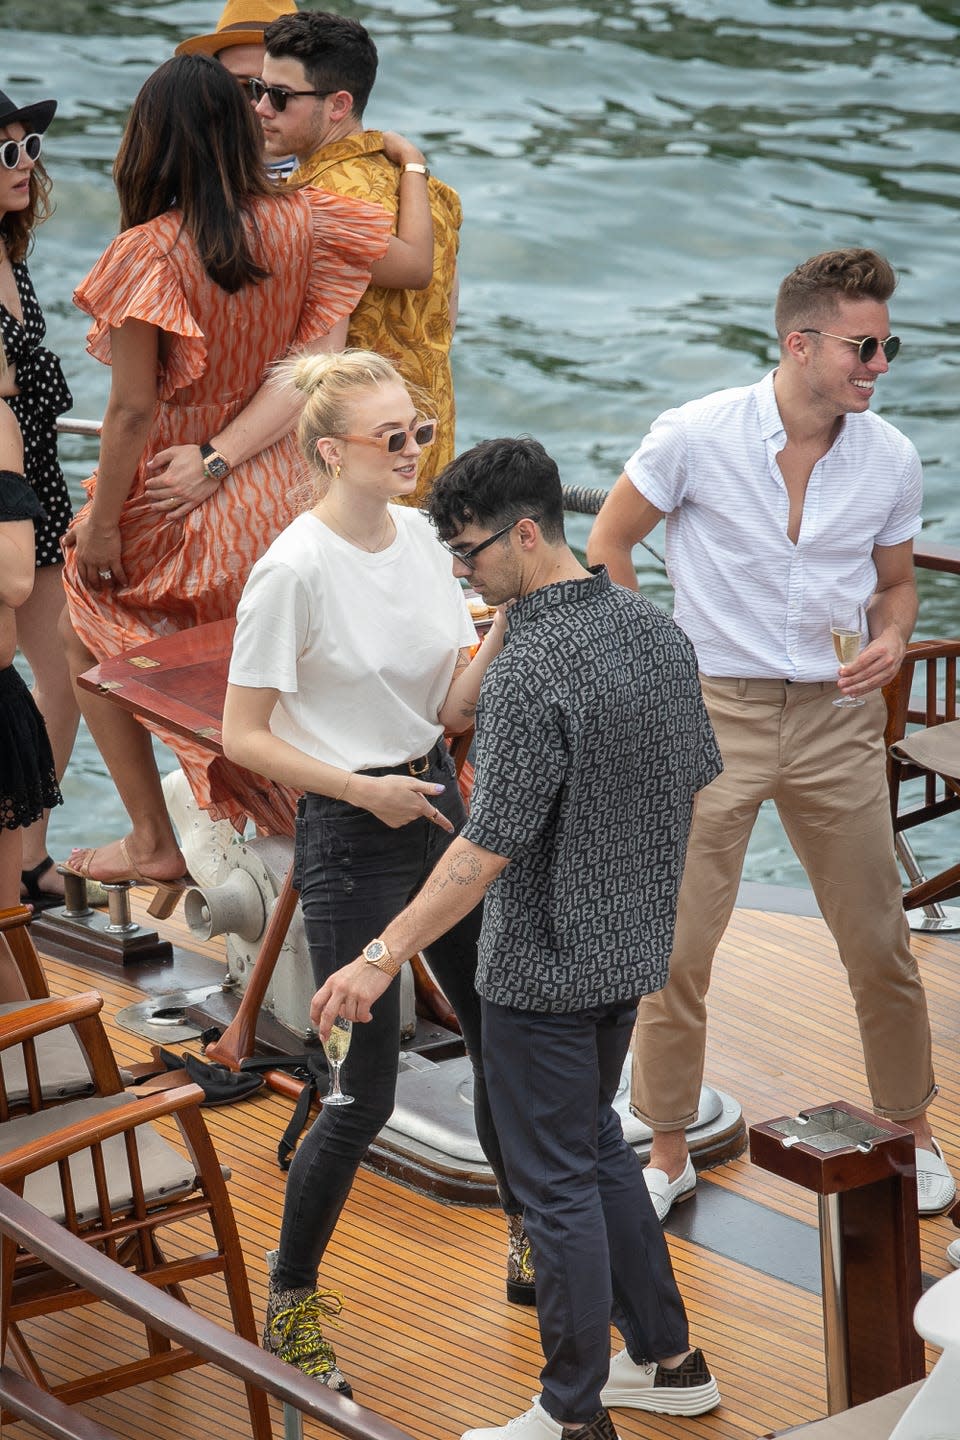 <p>Dancing on board a yacht together for their<a href="https://www.elle.com/uk/life-and-culture/wedding/a28182548/sophie-turner-joe-jonas-wedding-dress-pictures/" rel="nofollow noopener" target="_blank" data-ylk="slk:pre-wedding festivities in Paris." class="link "> pre-wedding festivities in Paris.</a></p>